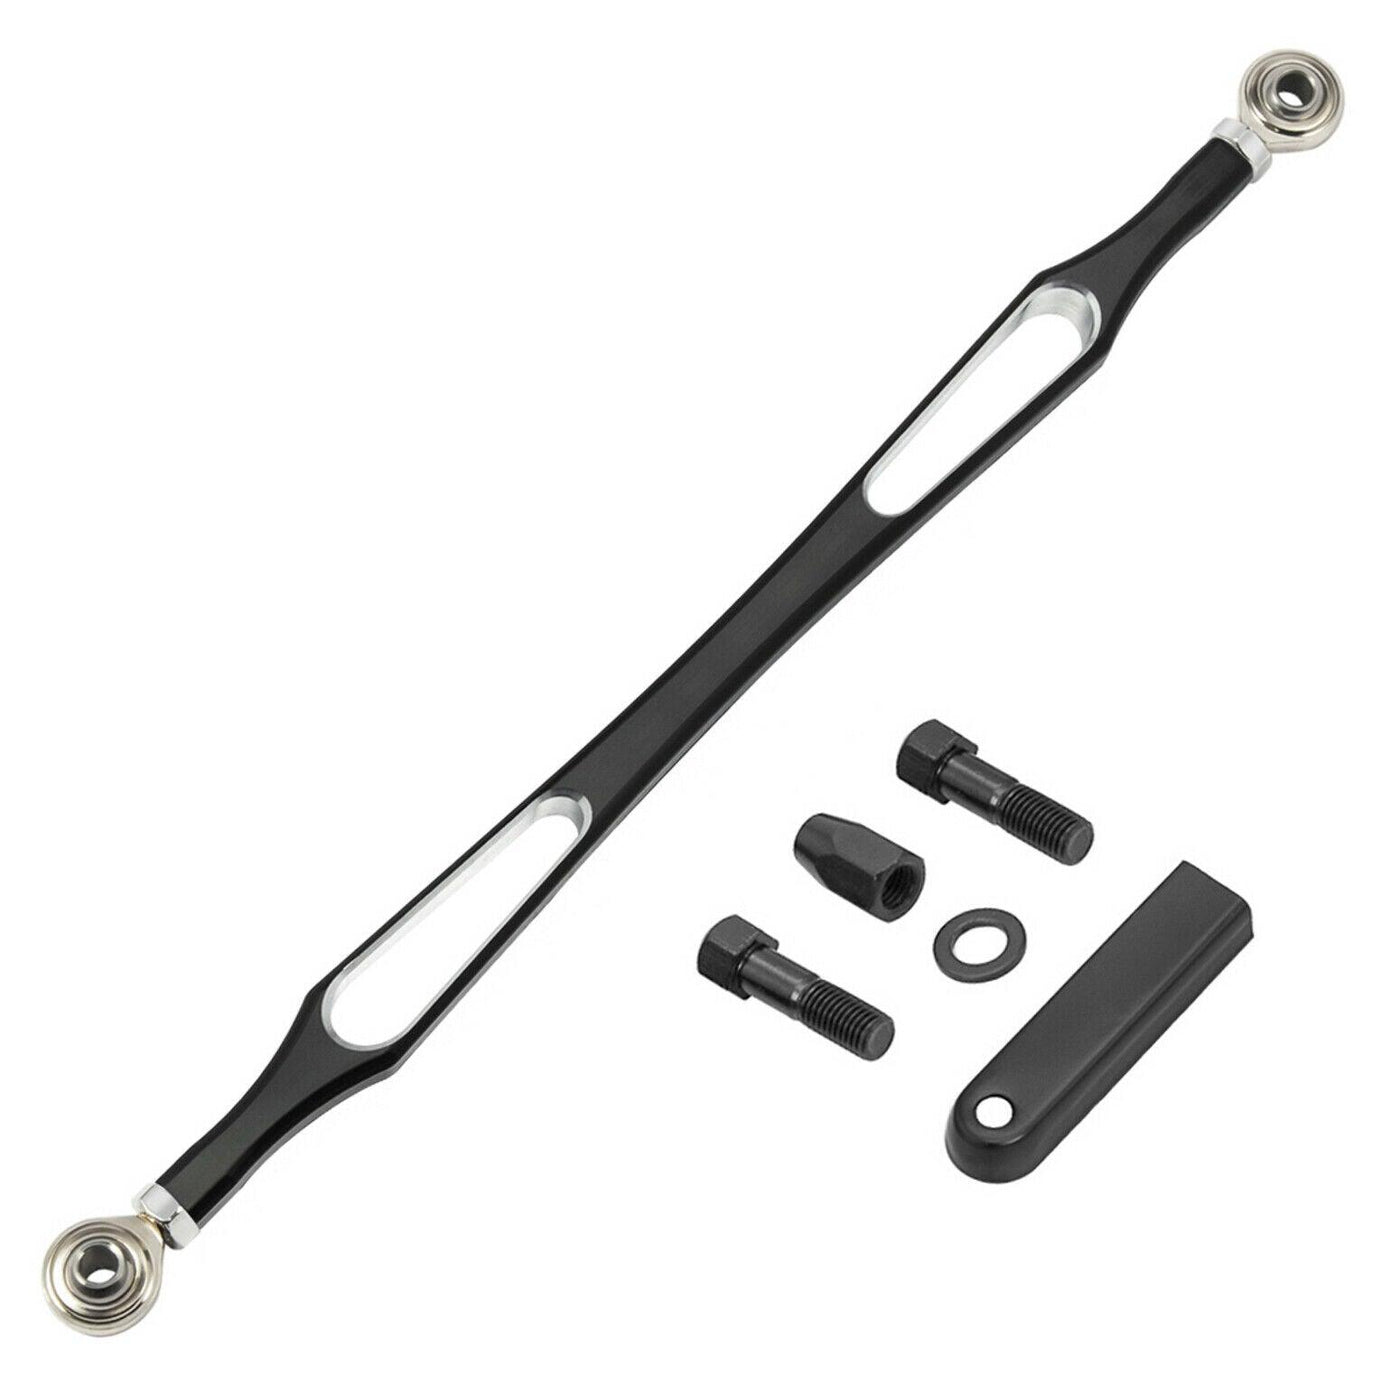 Aluminum Black Shift Linkage Shifter Fit for Harley Touring Softail 1986-2021 - Moto Life Products